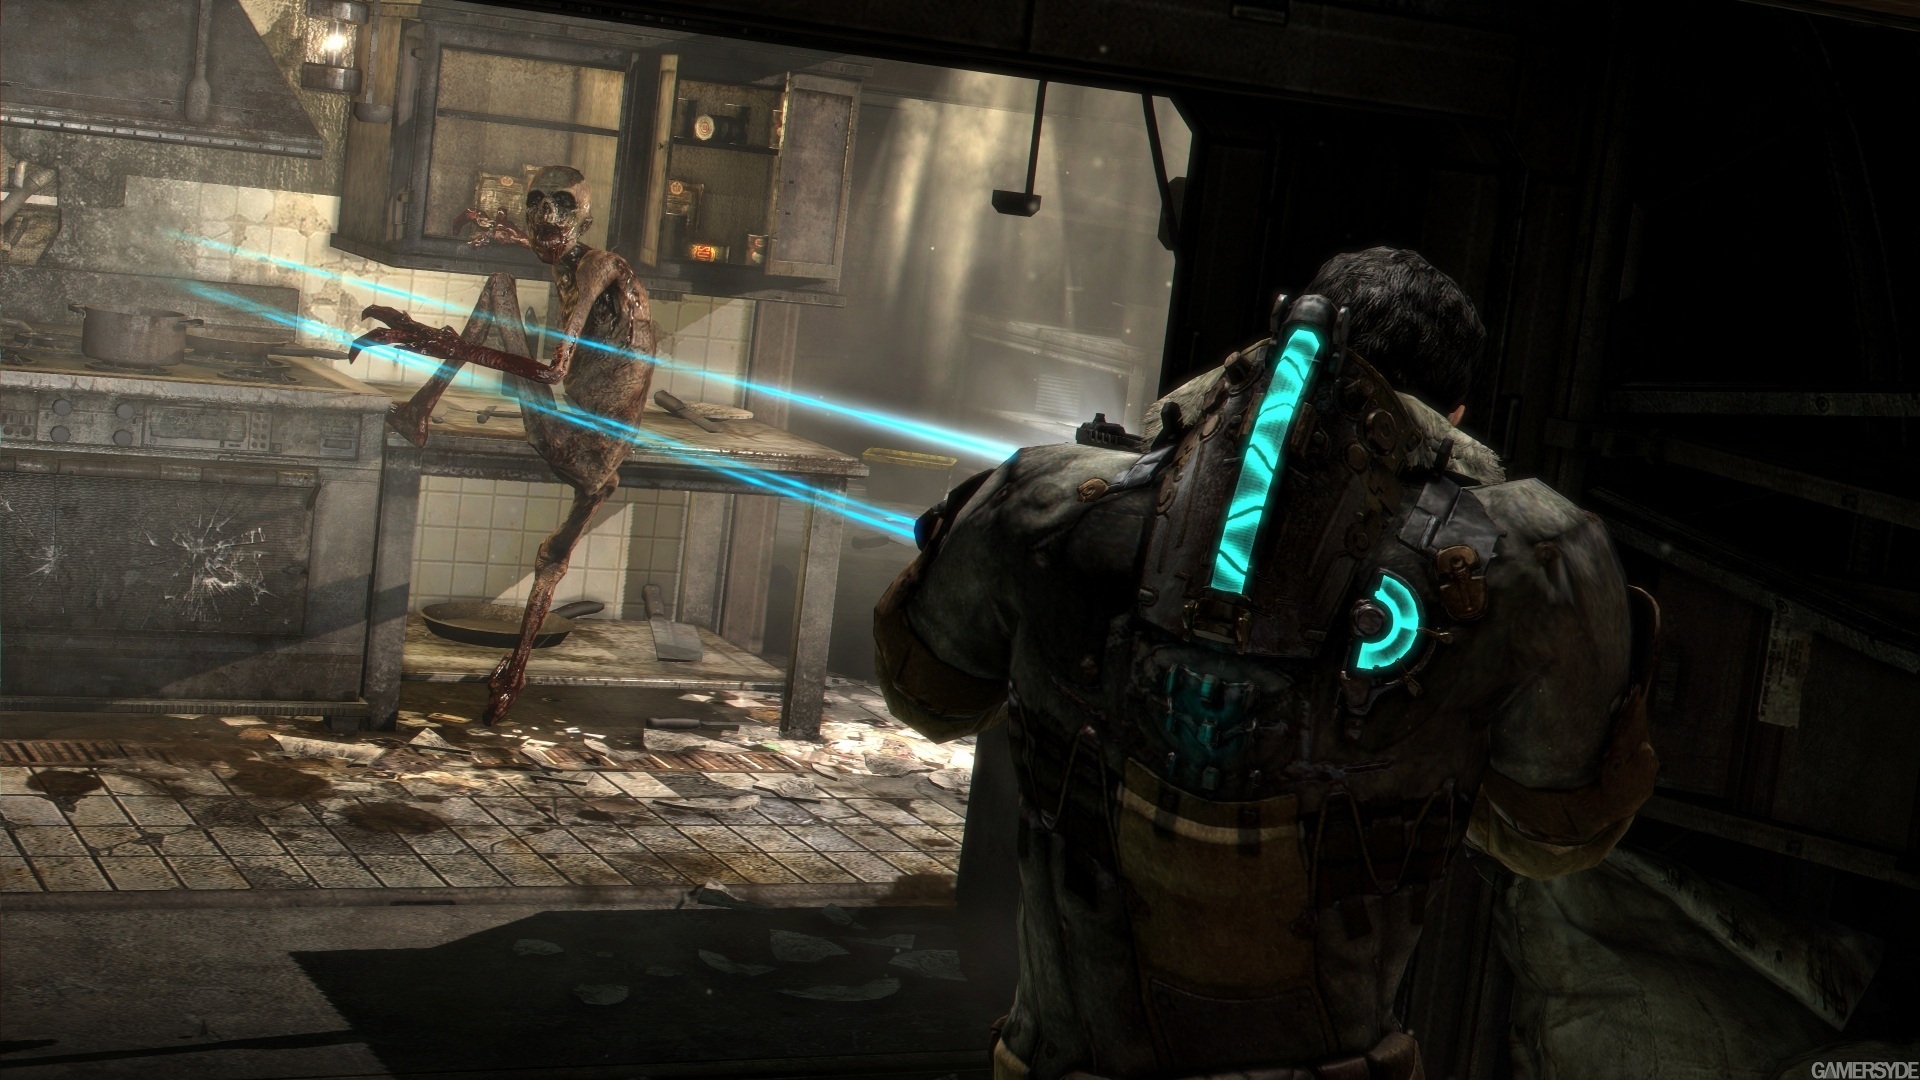 dead space 2 ps5 download